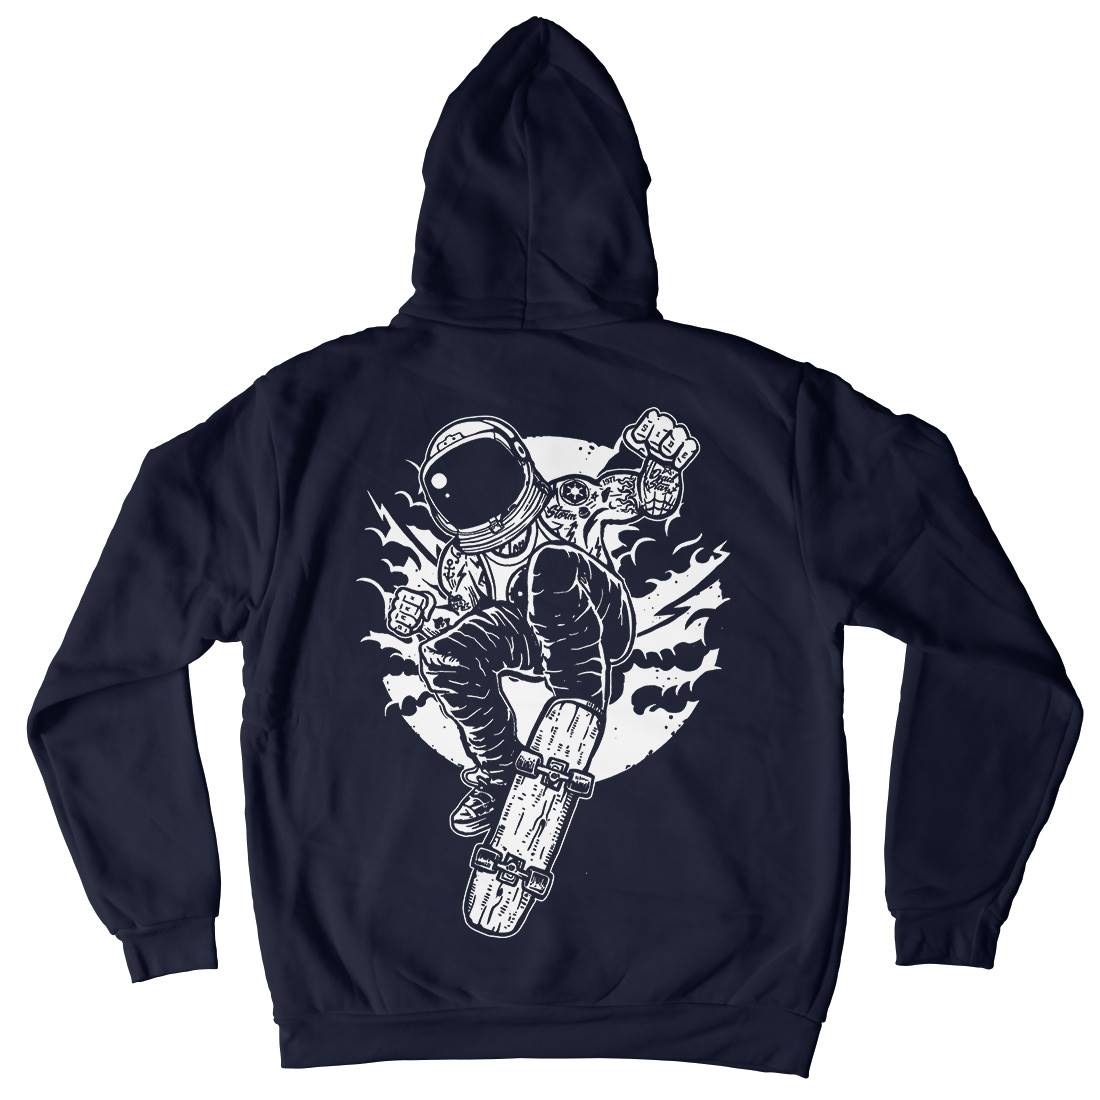 Skater Kids Crew Neck Hoodie Space A576